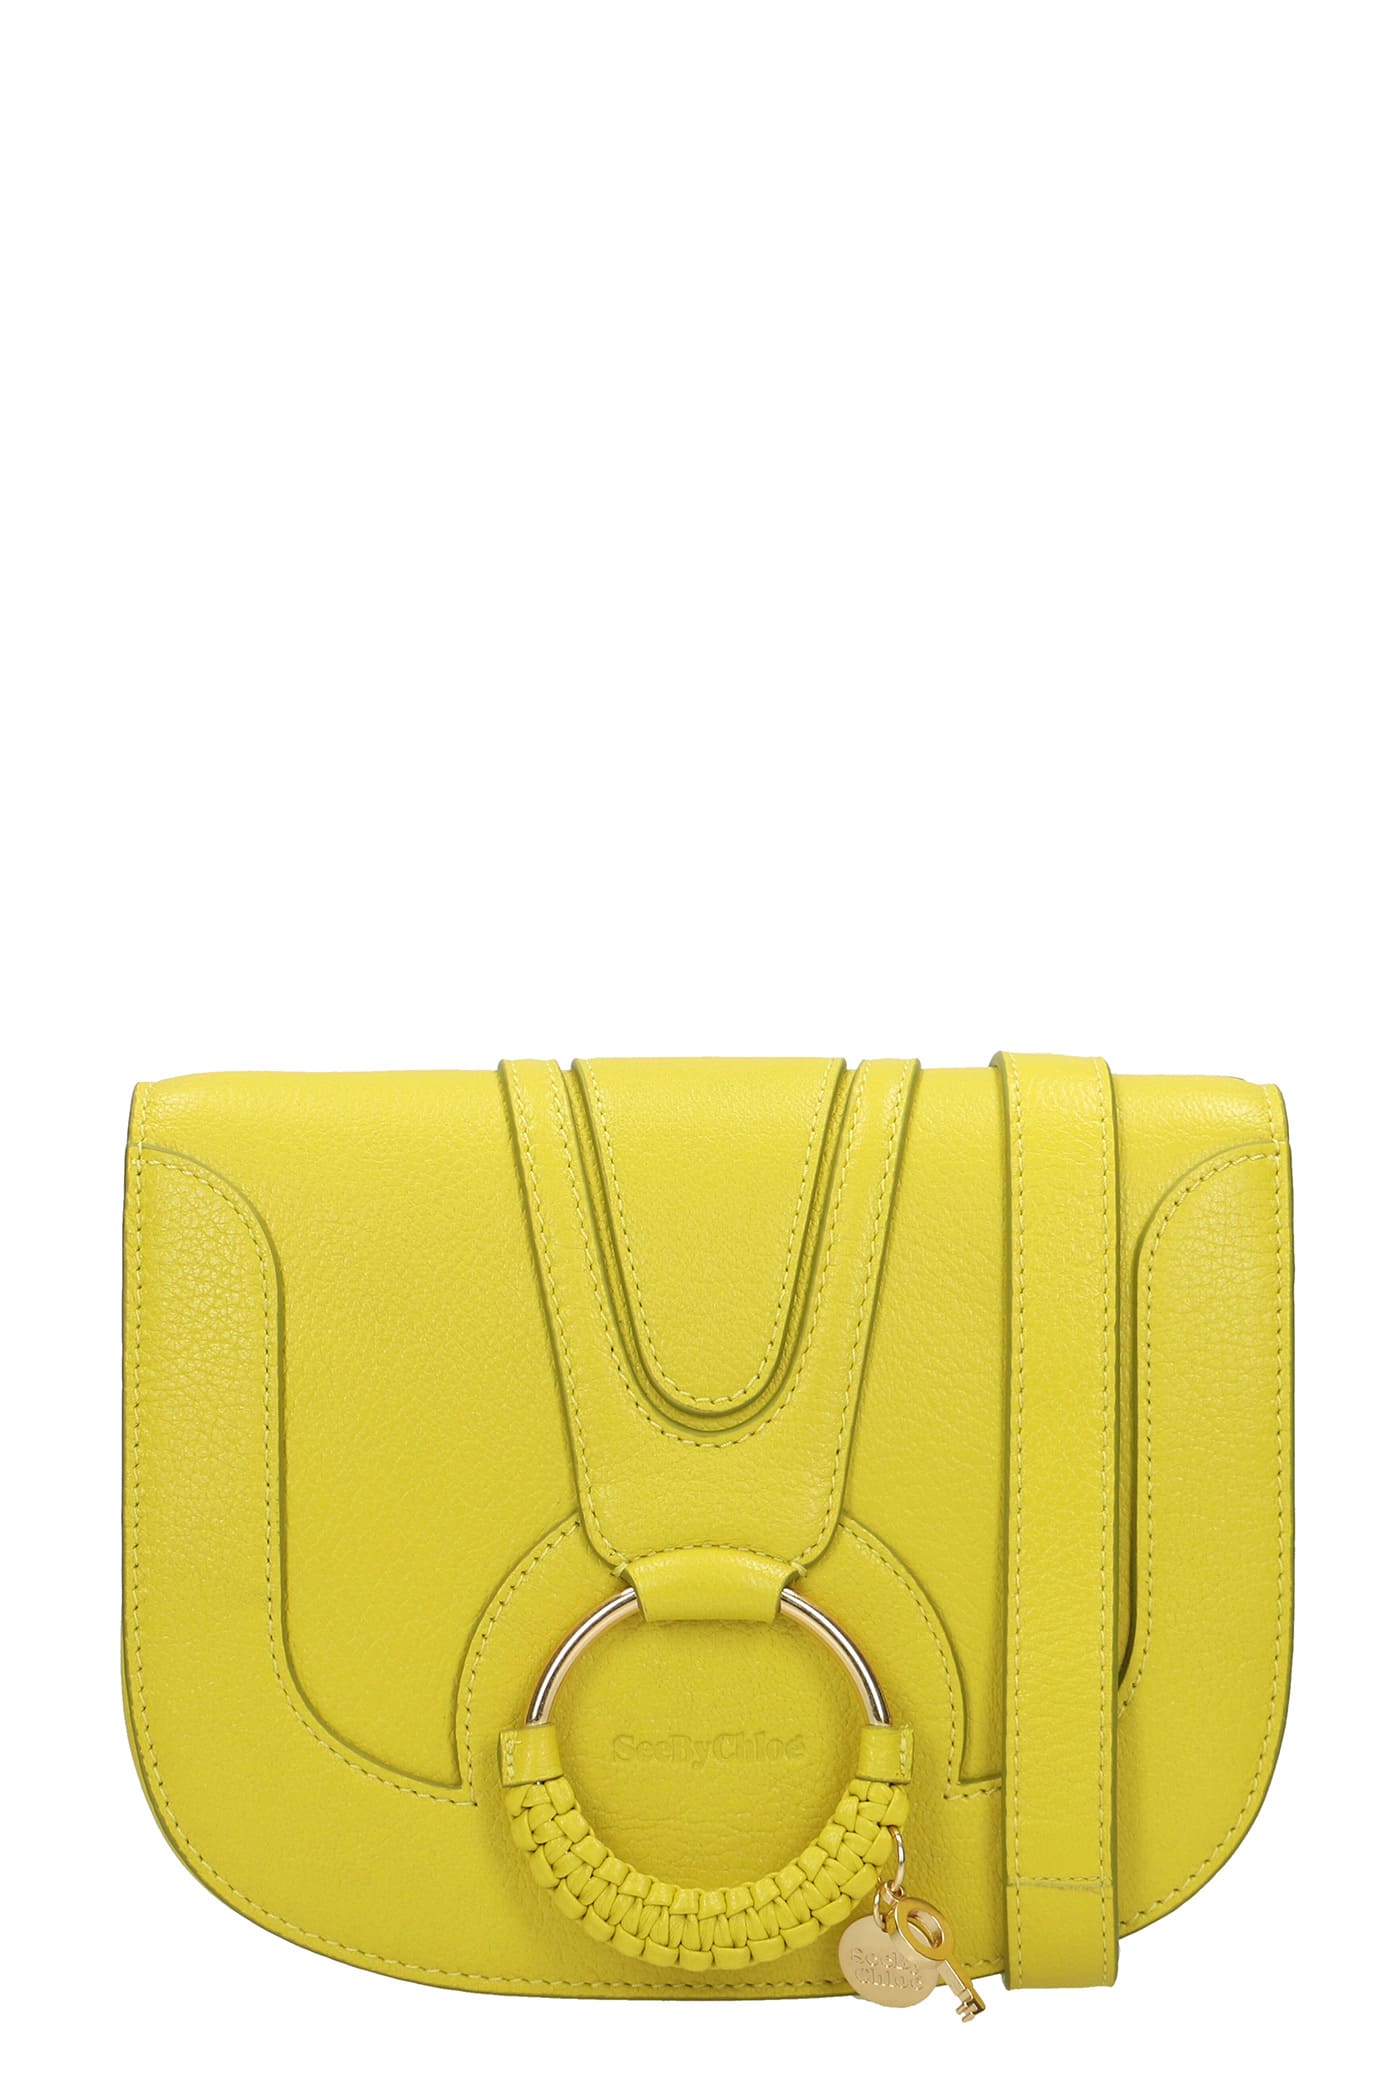 See by Chloé Hana Shoulder Bag In Yellow Leather